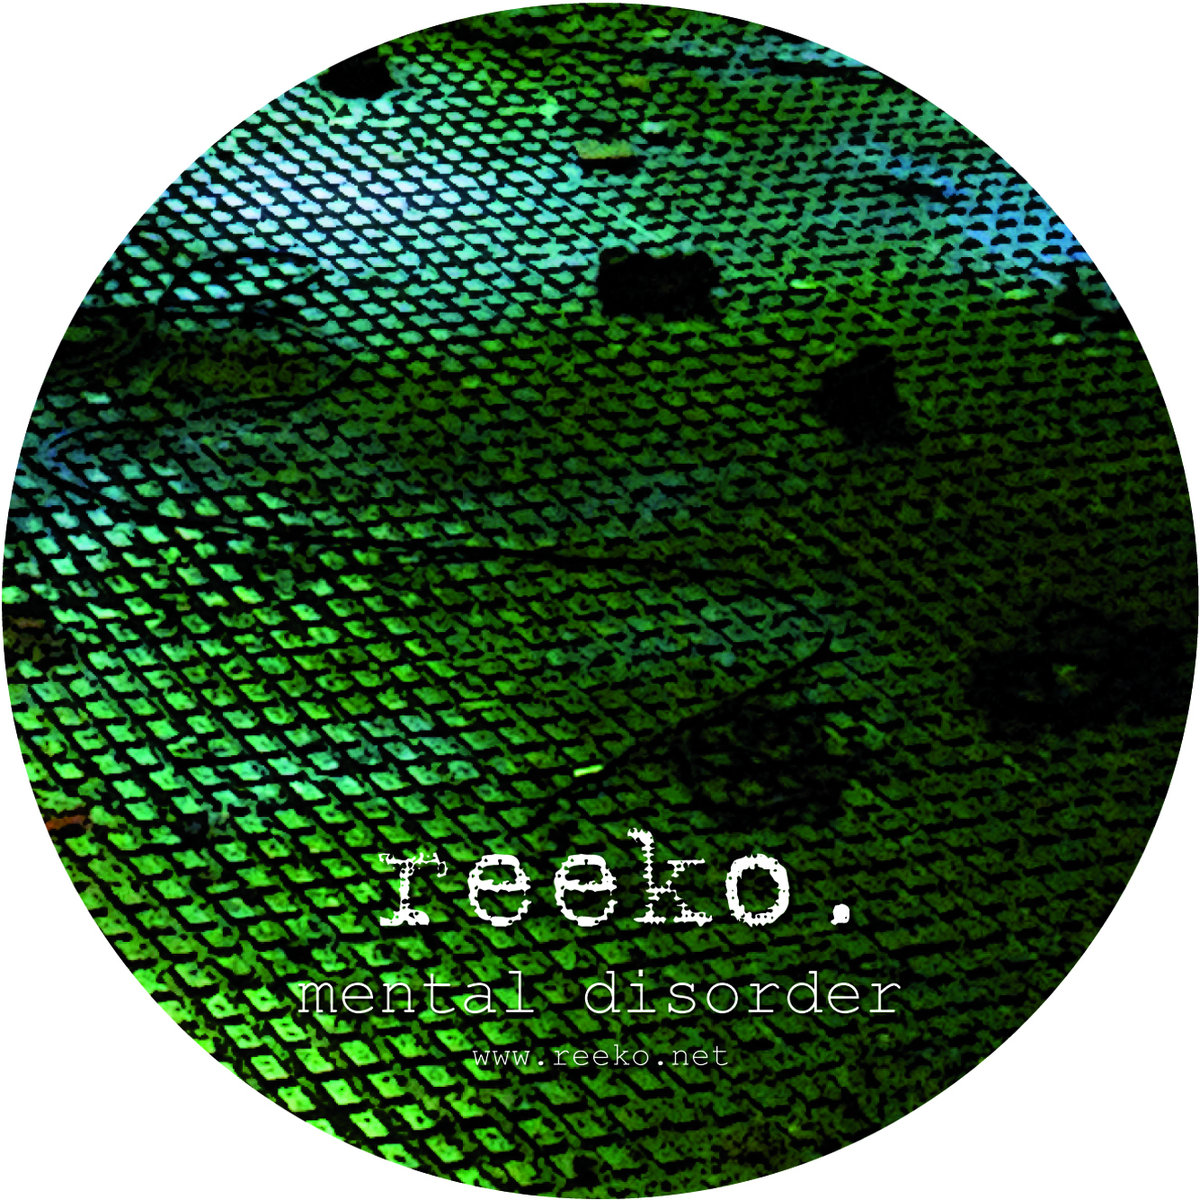 Reeko – The day after